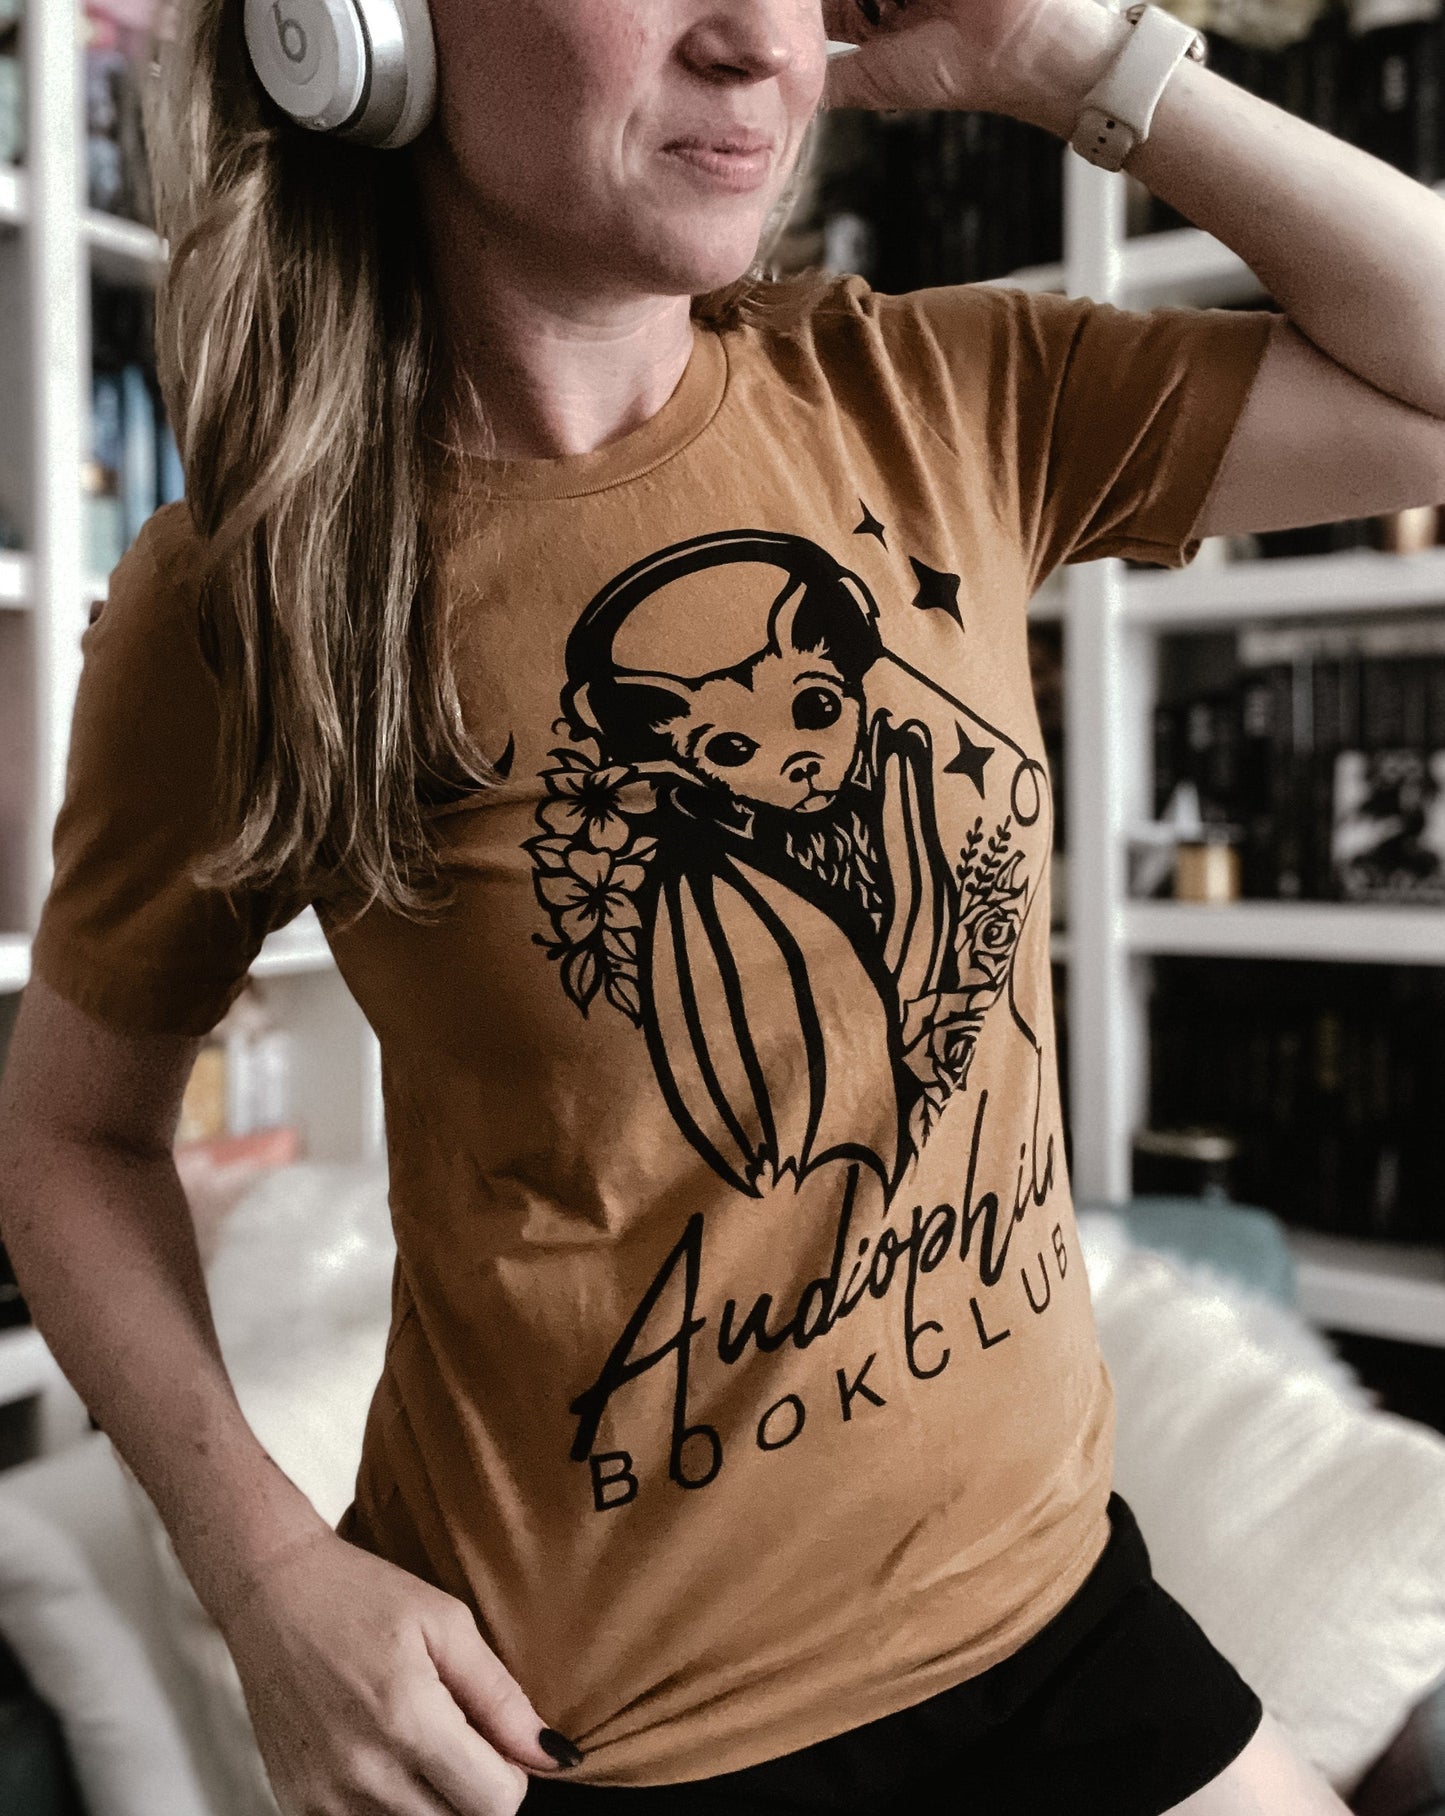 Audiophile Book Club Unisex t-shirt by FireDrake Artistry Photo by @themommabookclub